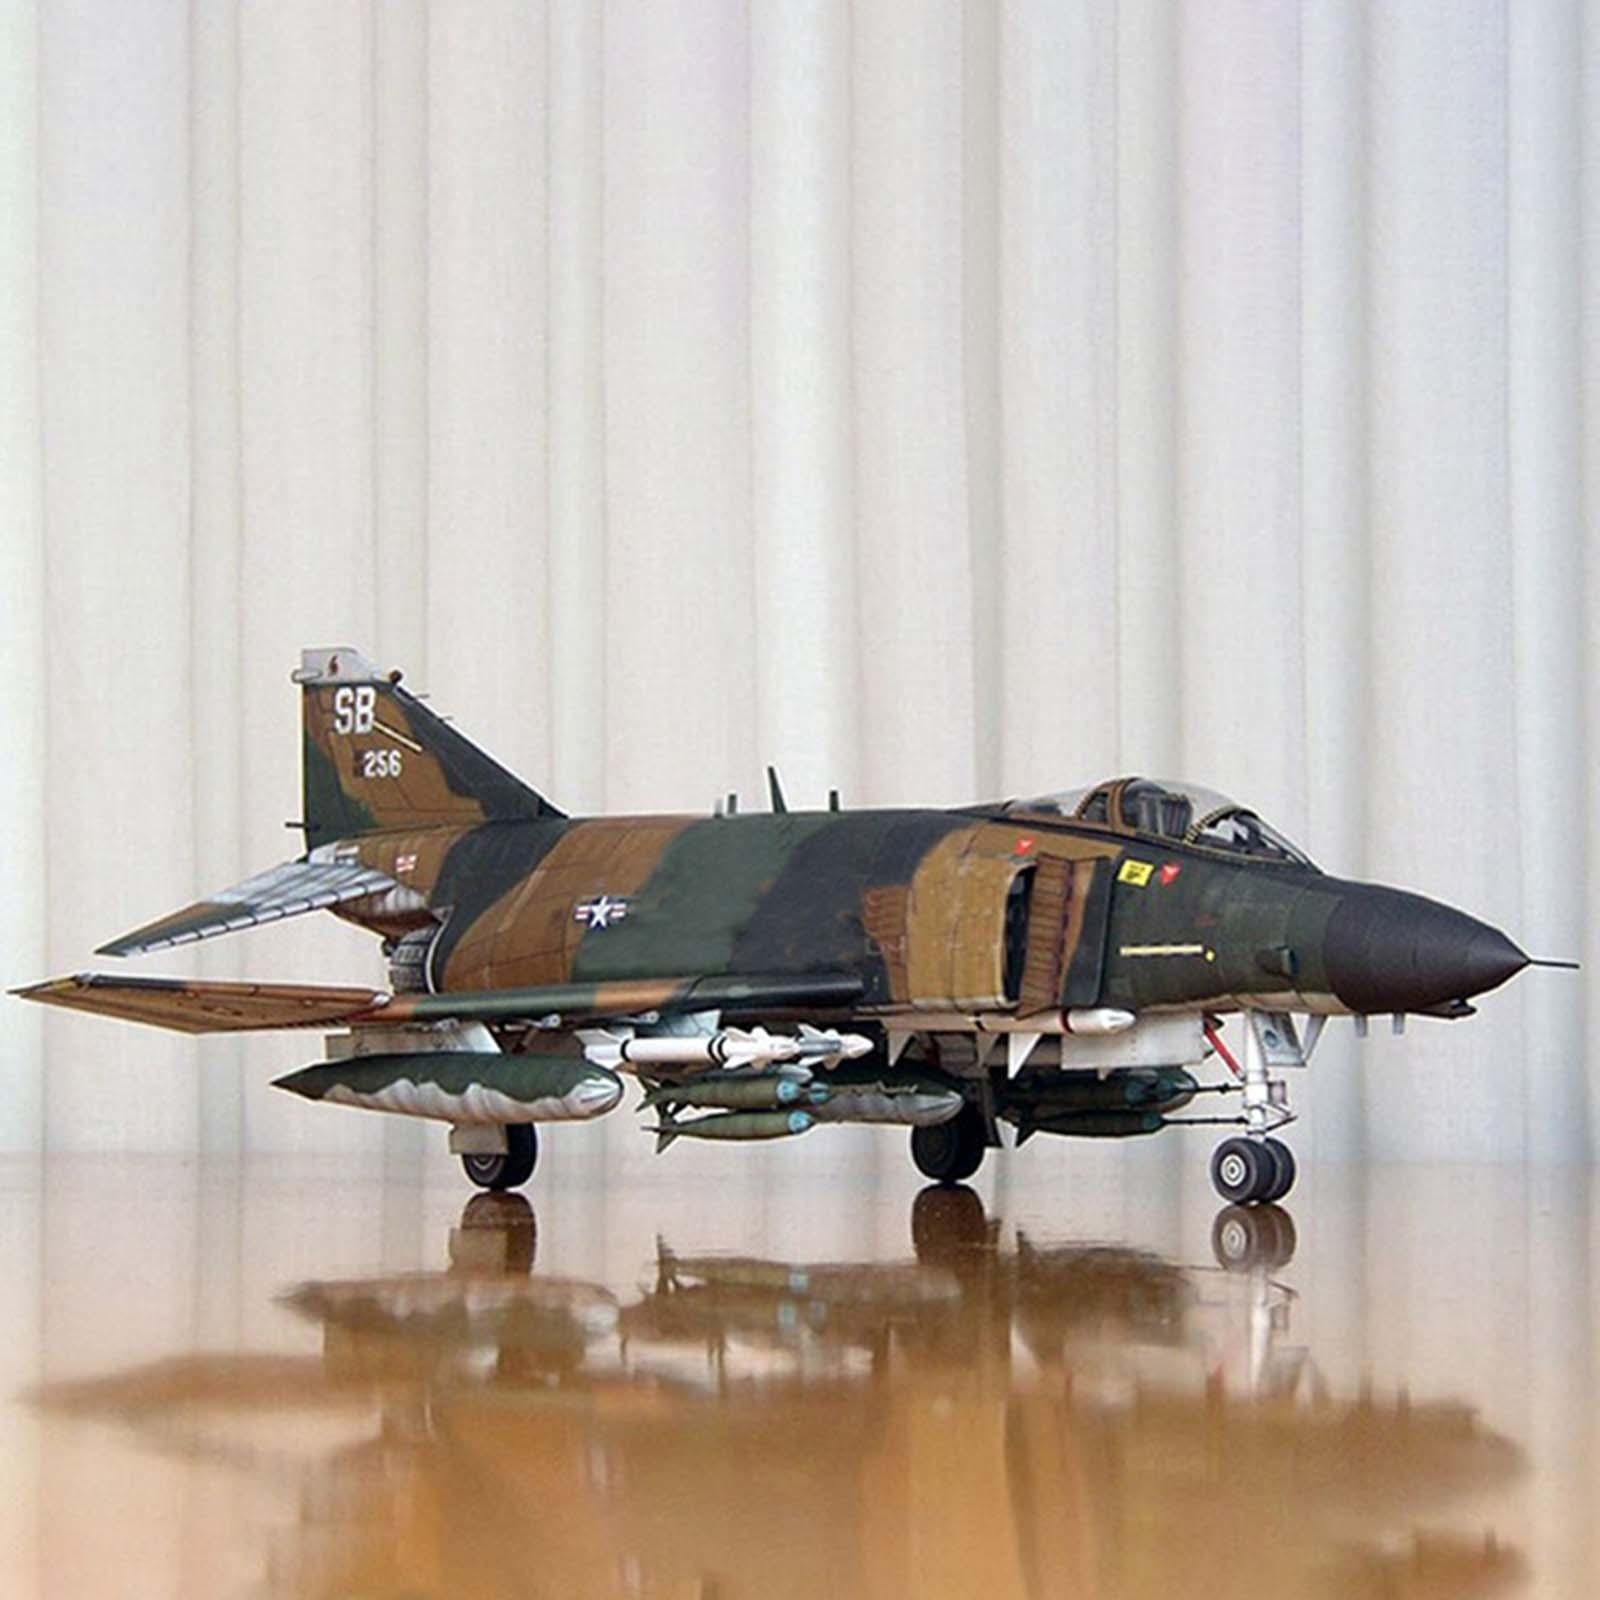 1/33 American Plane Model Puzzle Toy DIY F-4B Display Ornaments Fighter Model for Desktop Table Room Gift Collection